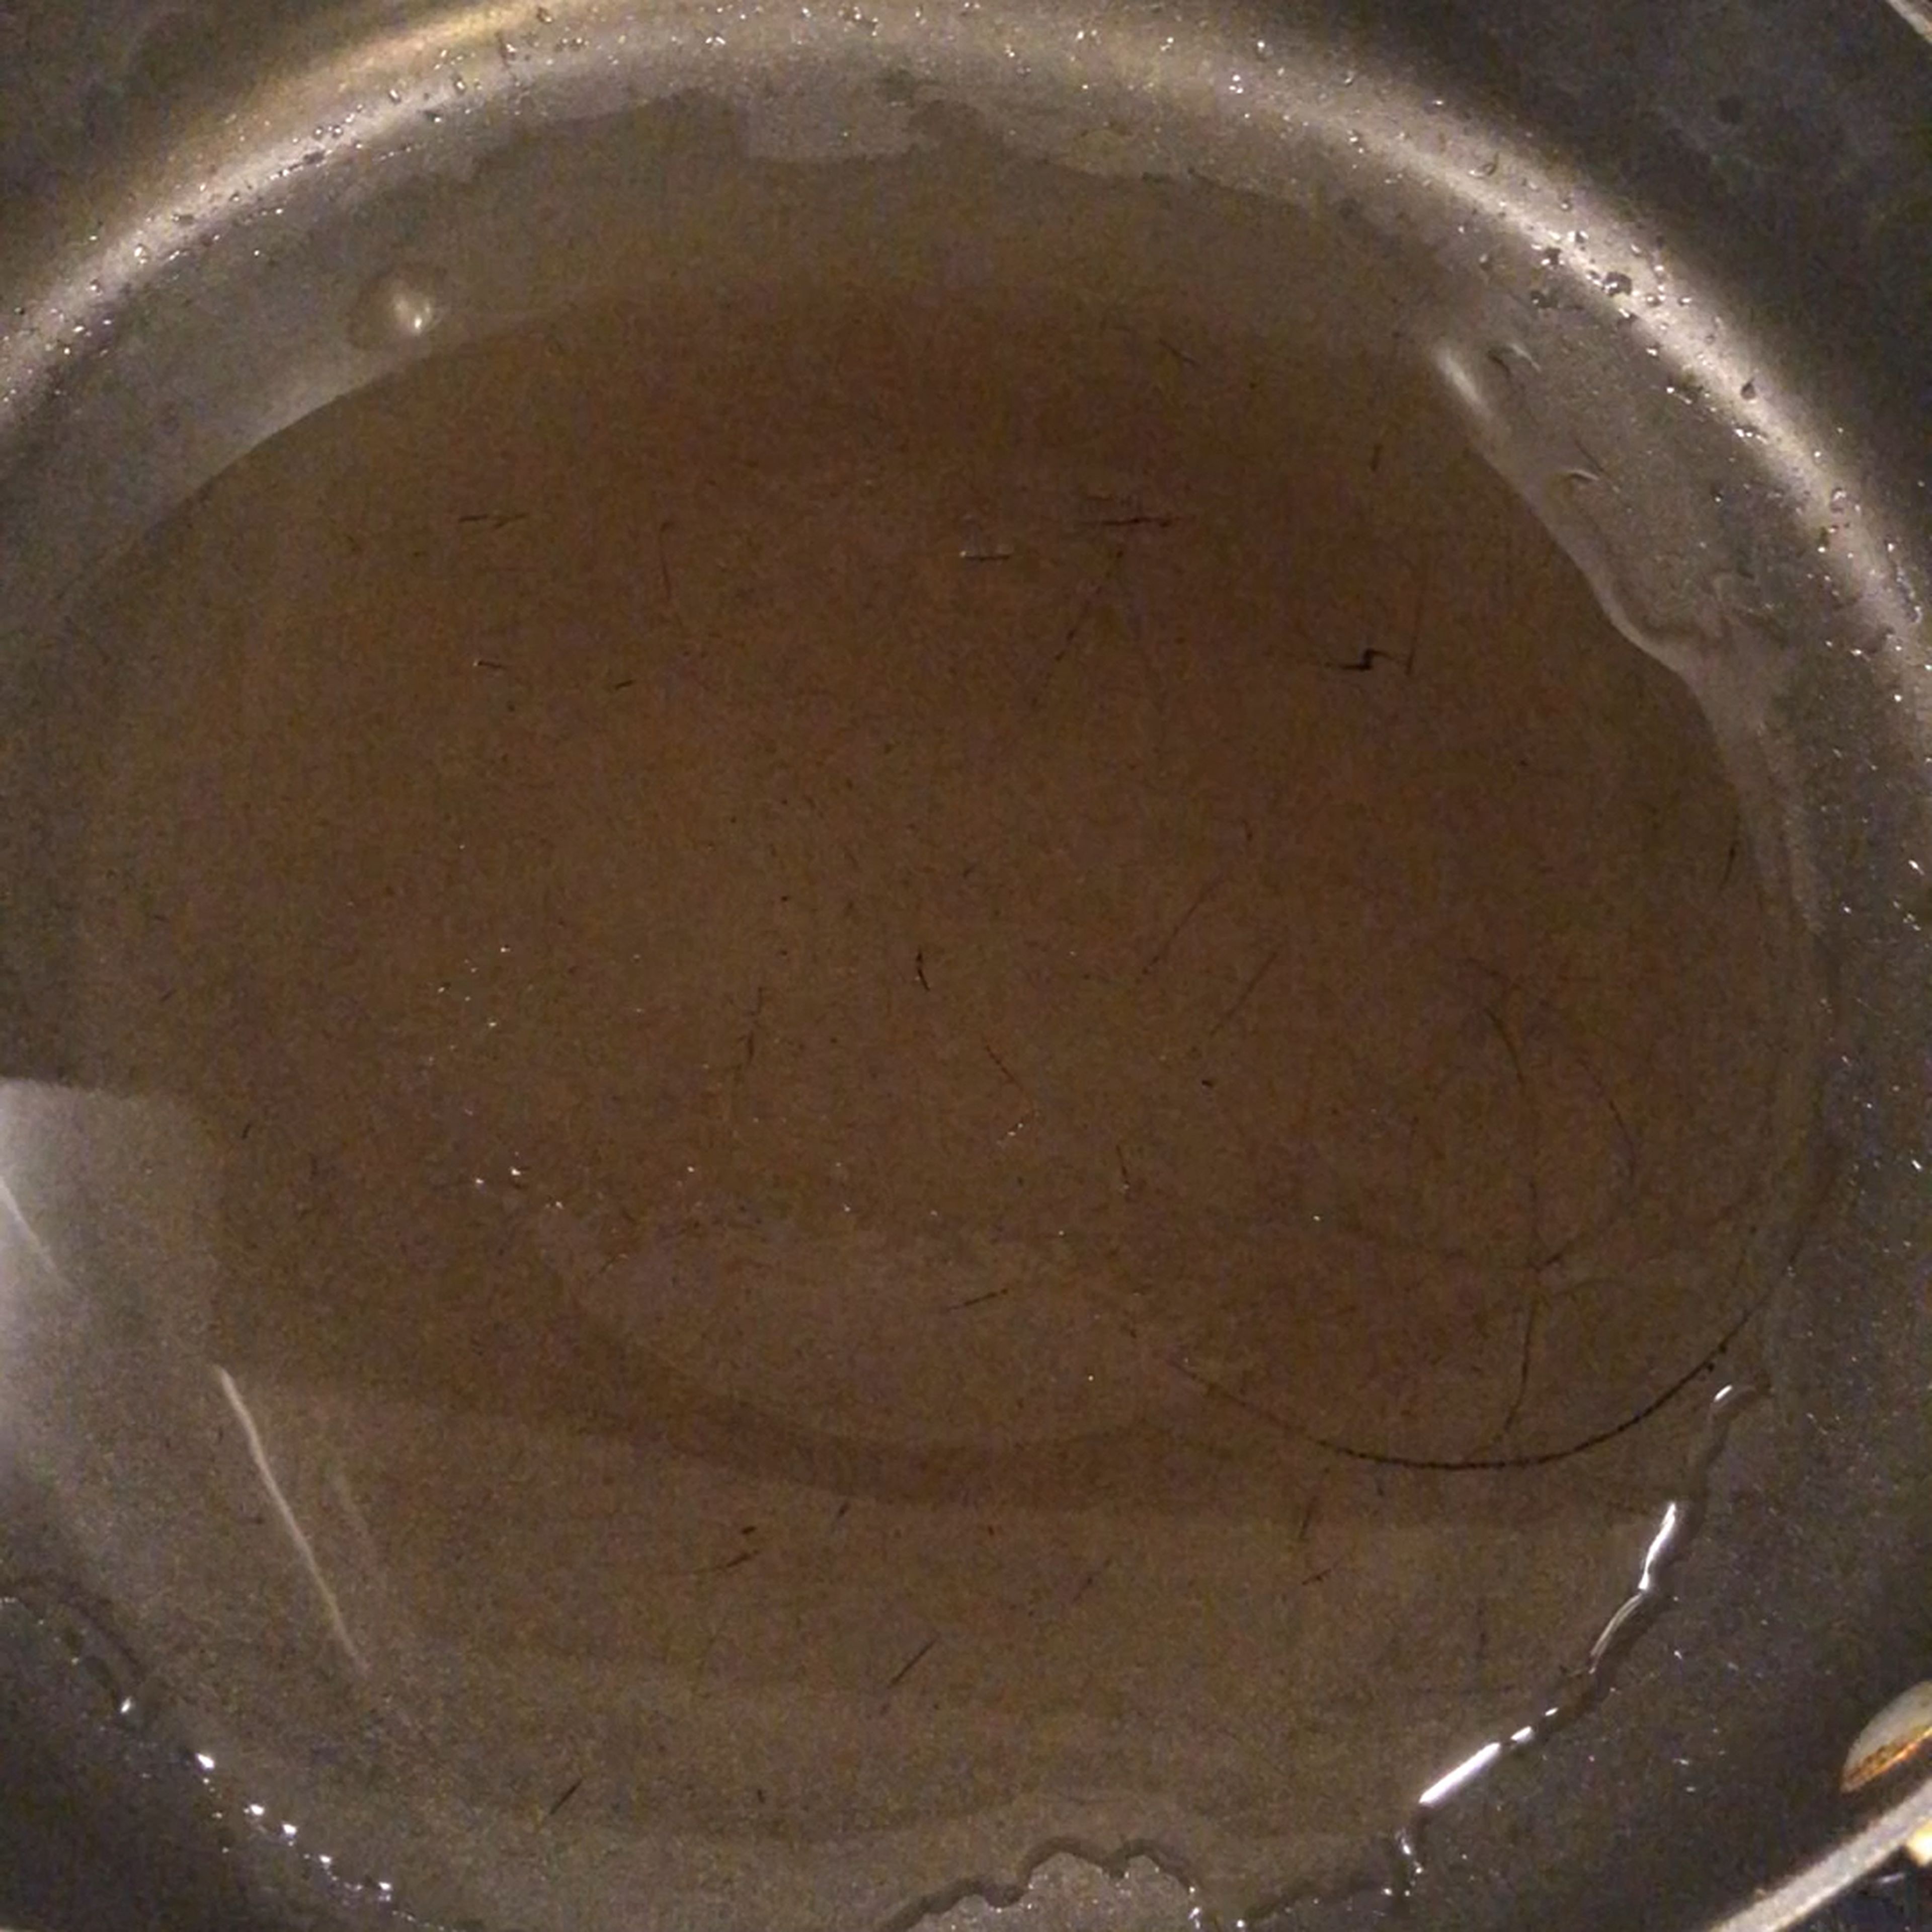 Pour oil on the heated pan